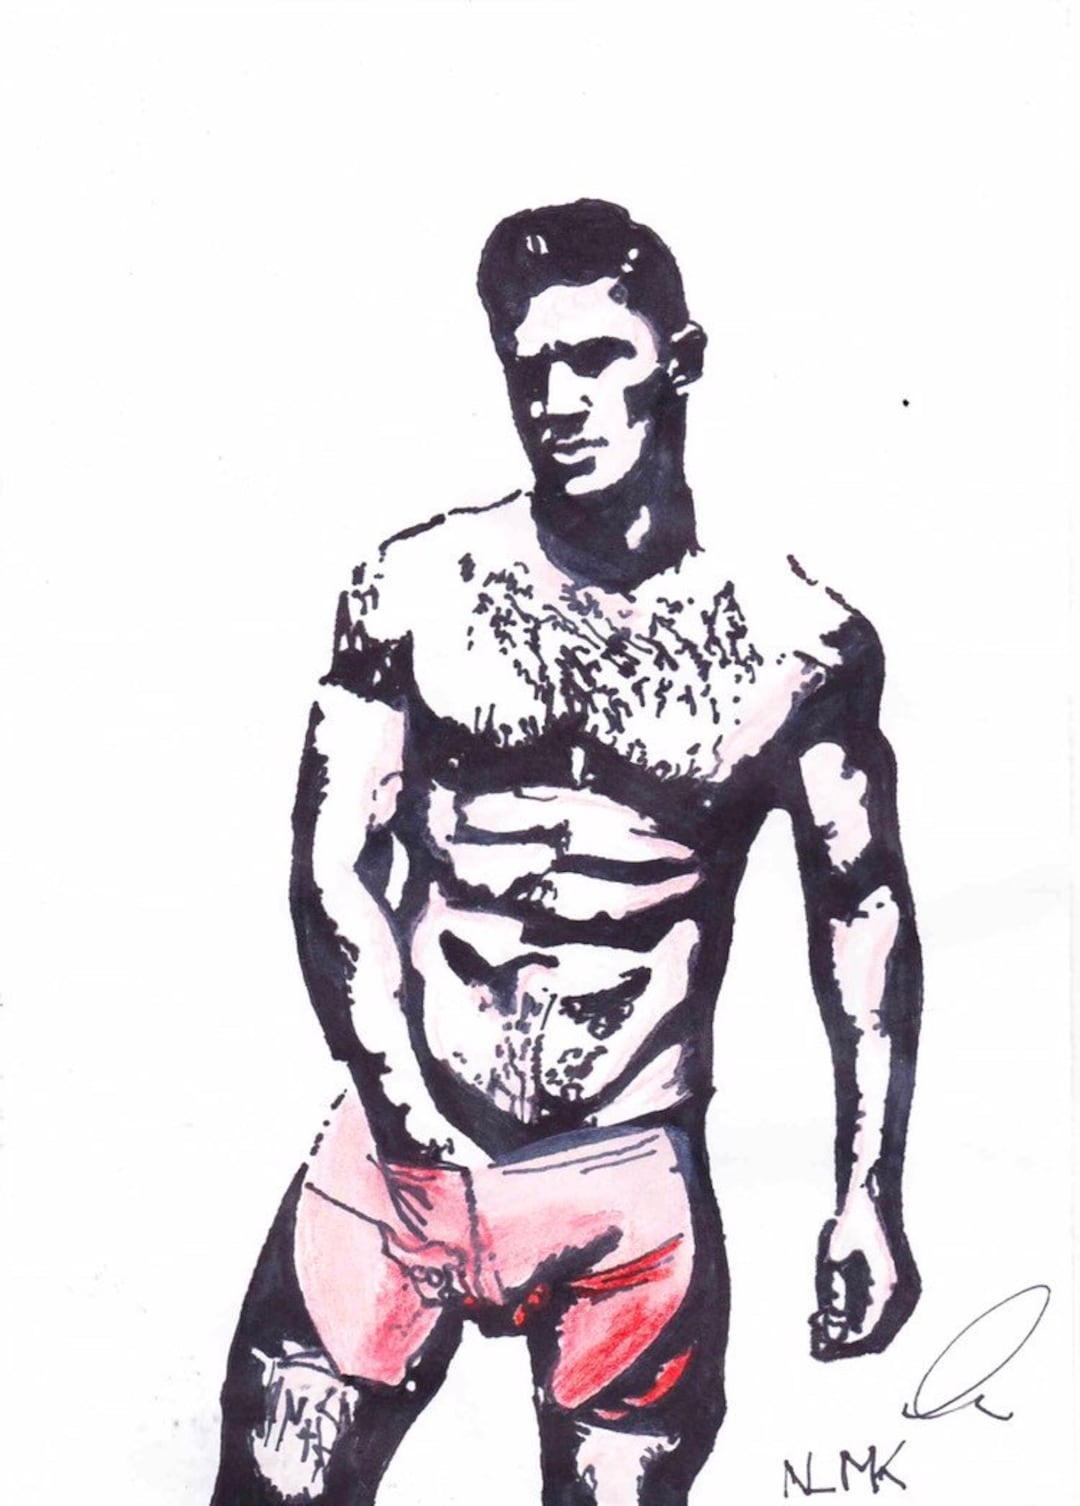 Original Porn Hairy Chested Hunky Muscled Guy With Hands Down - Etsy New  Zealand